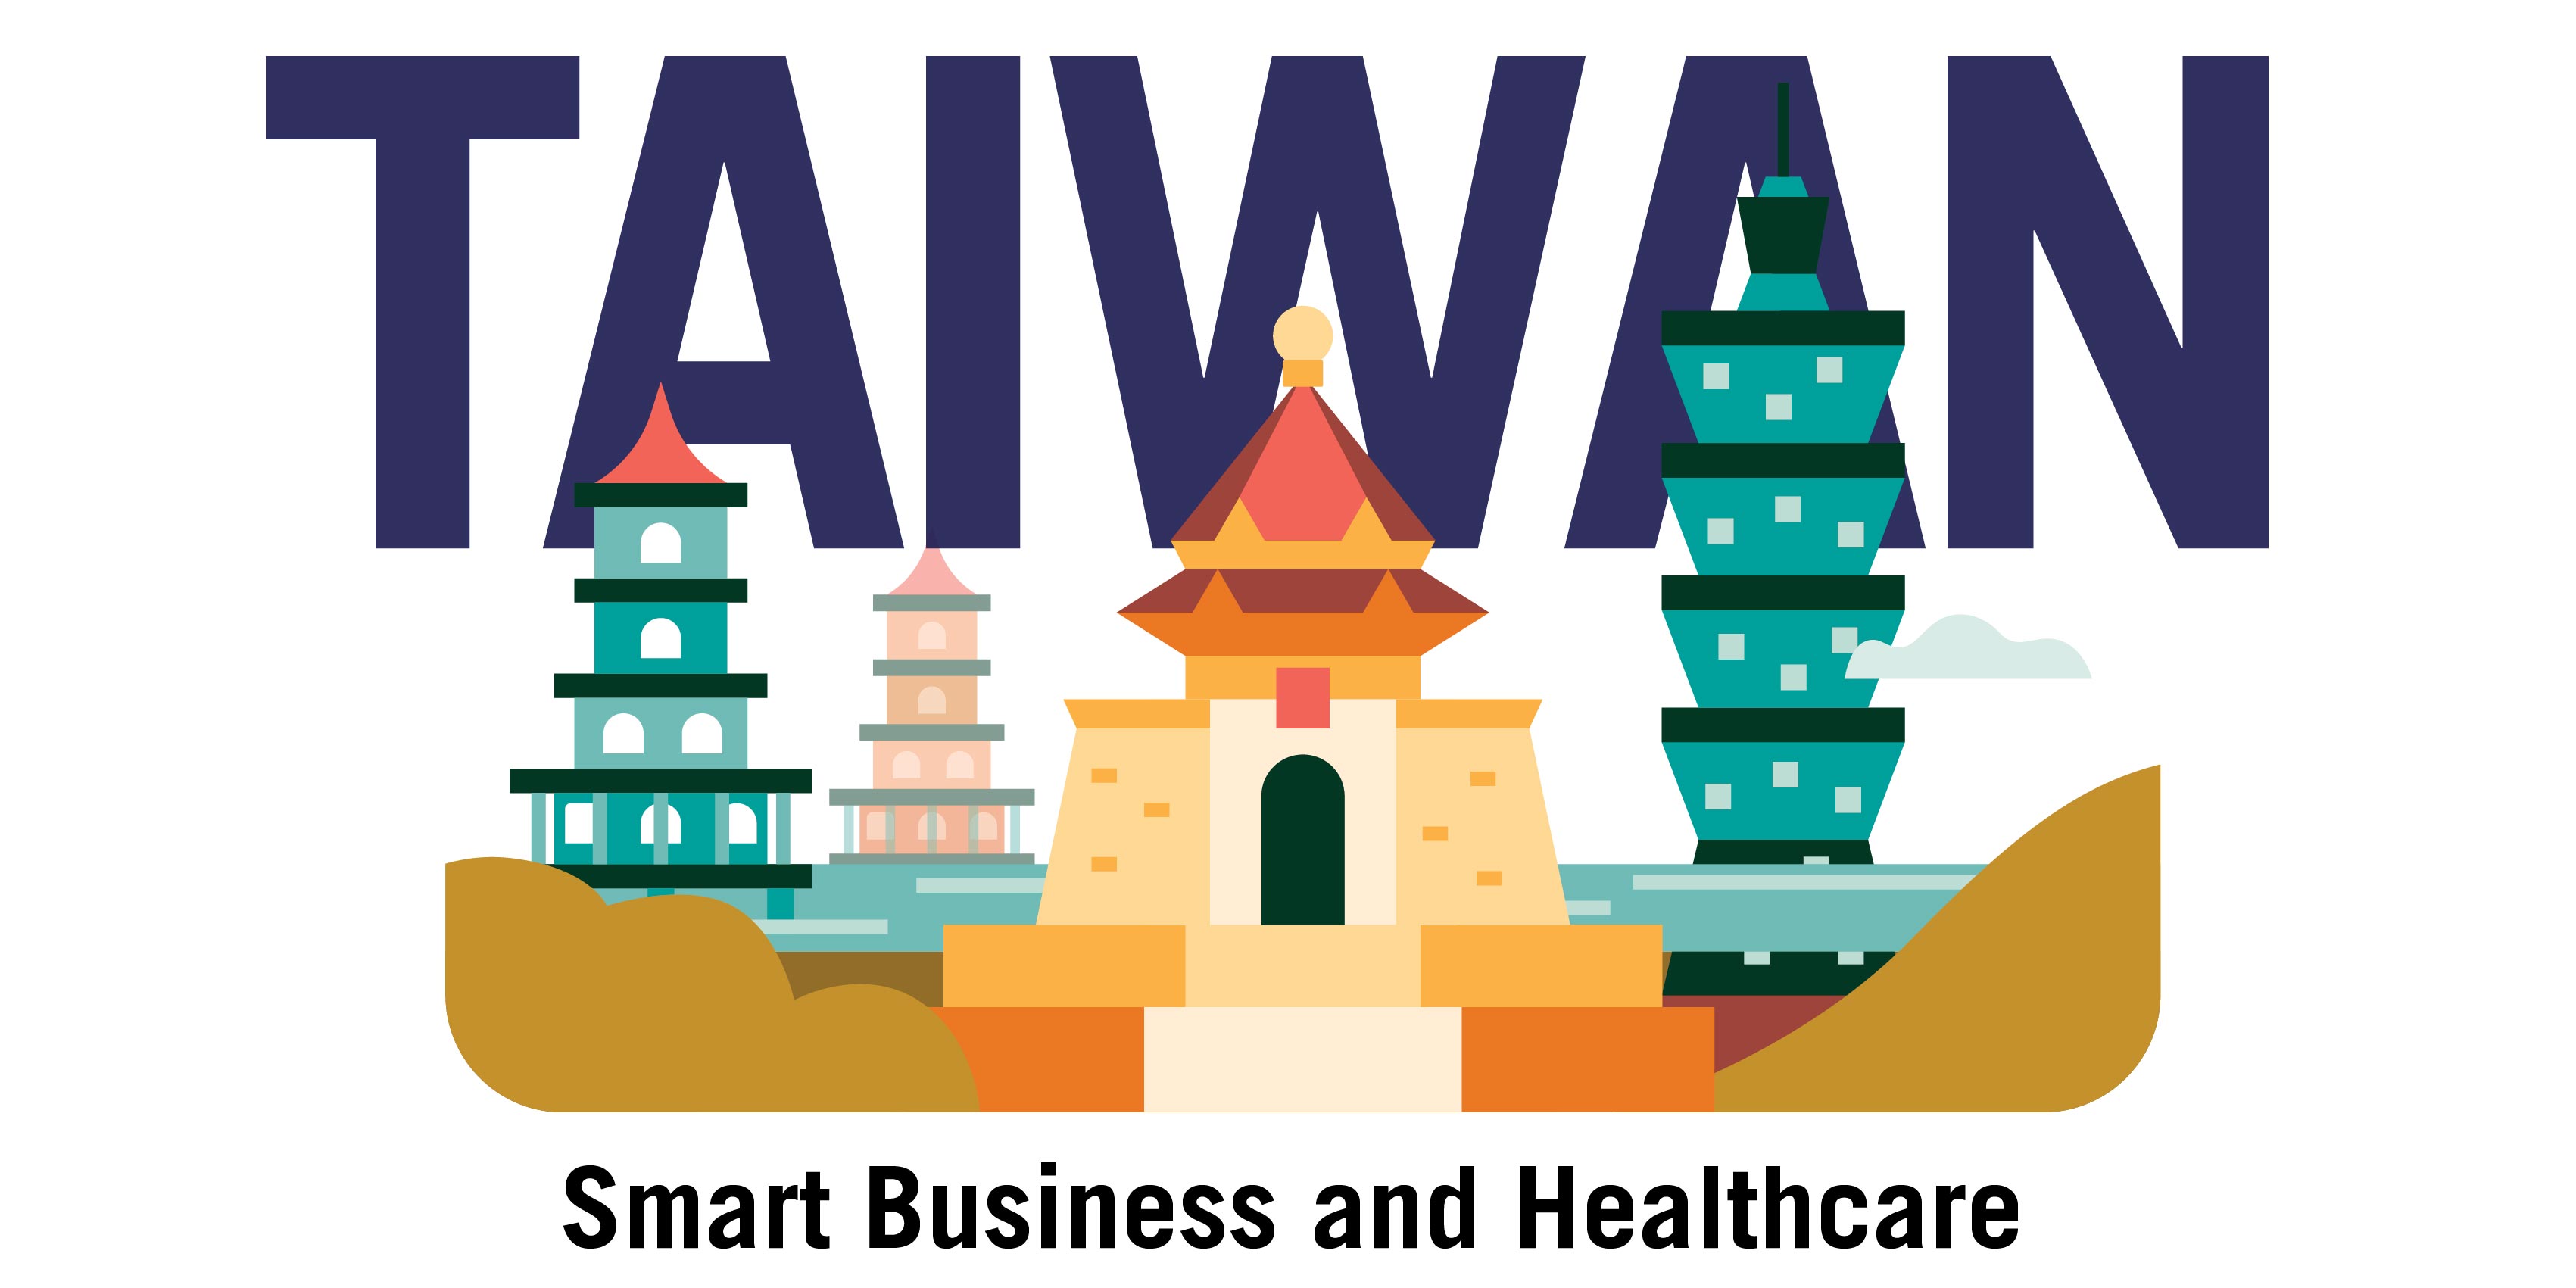 Smart Business and Healthcare